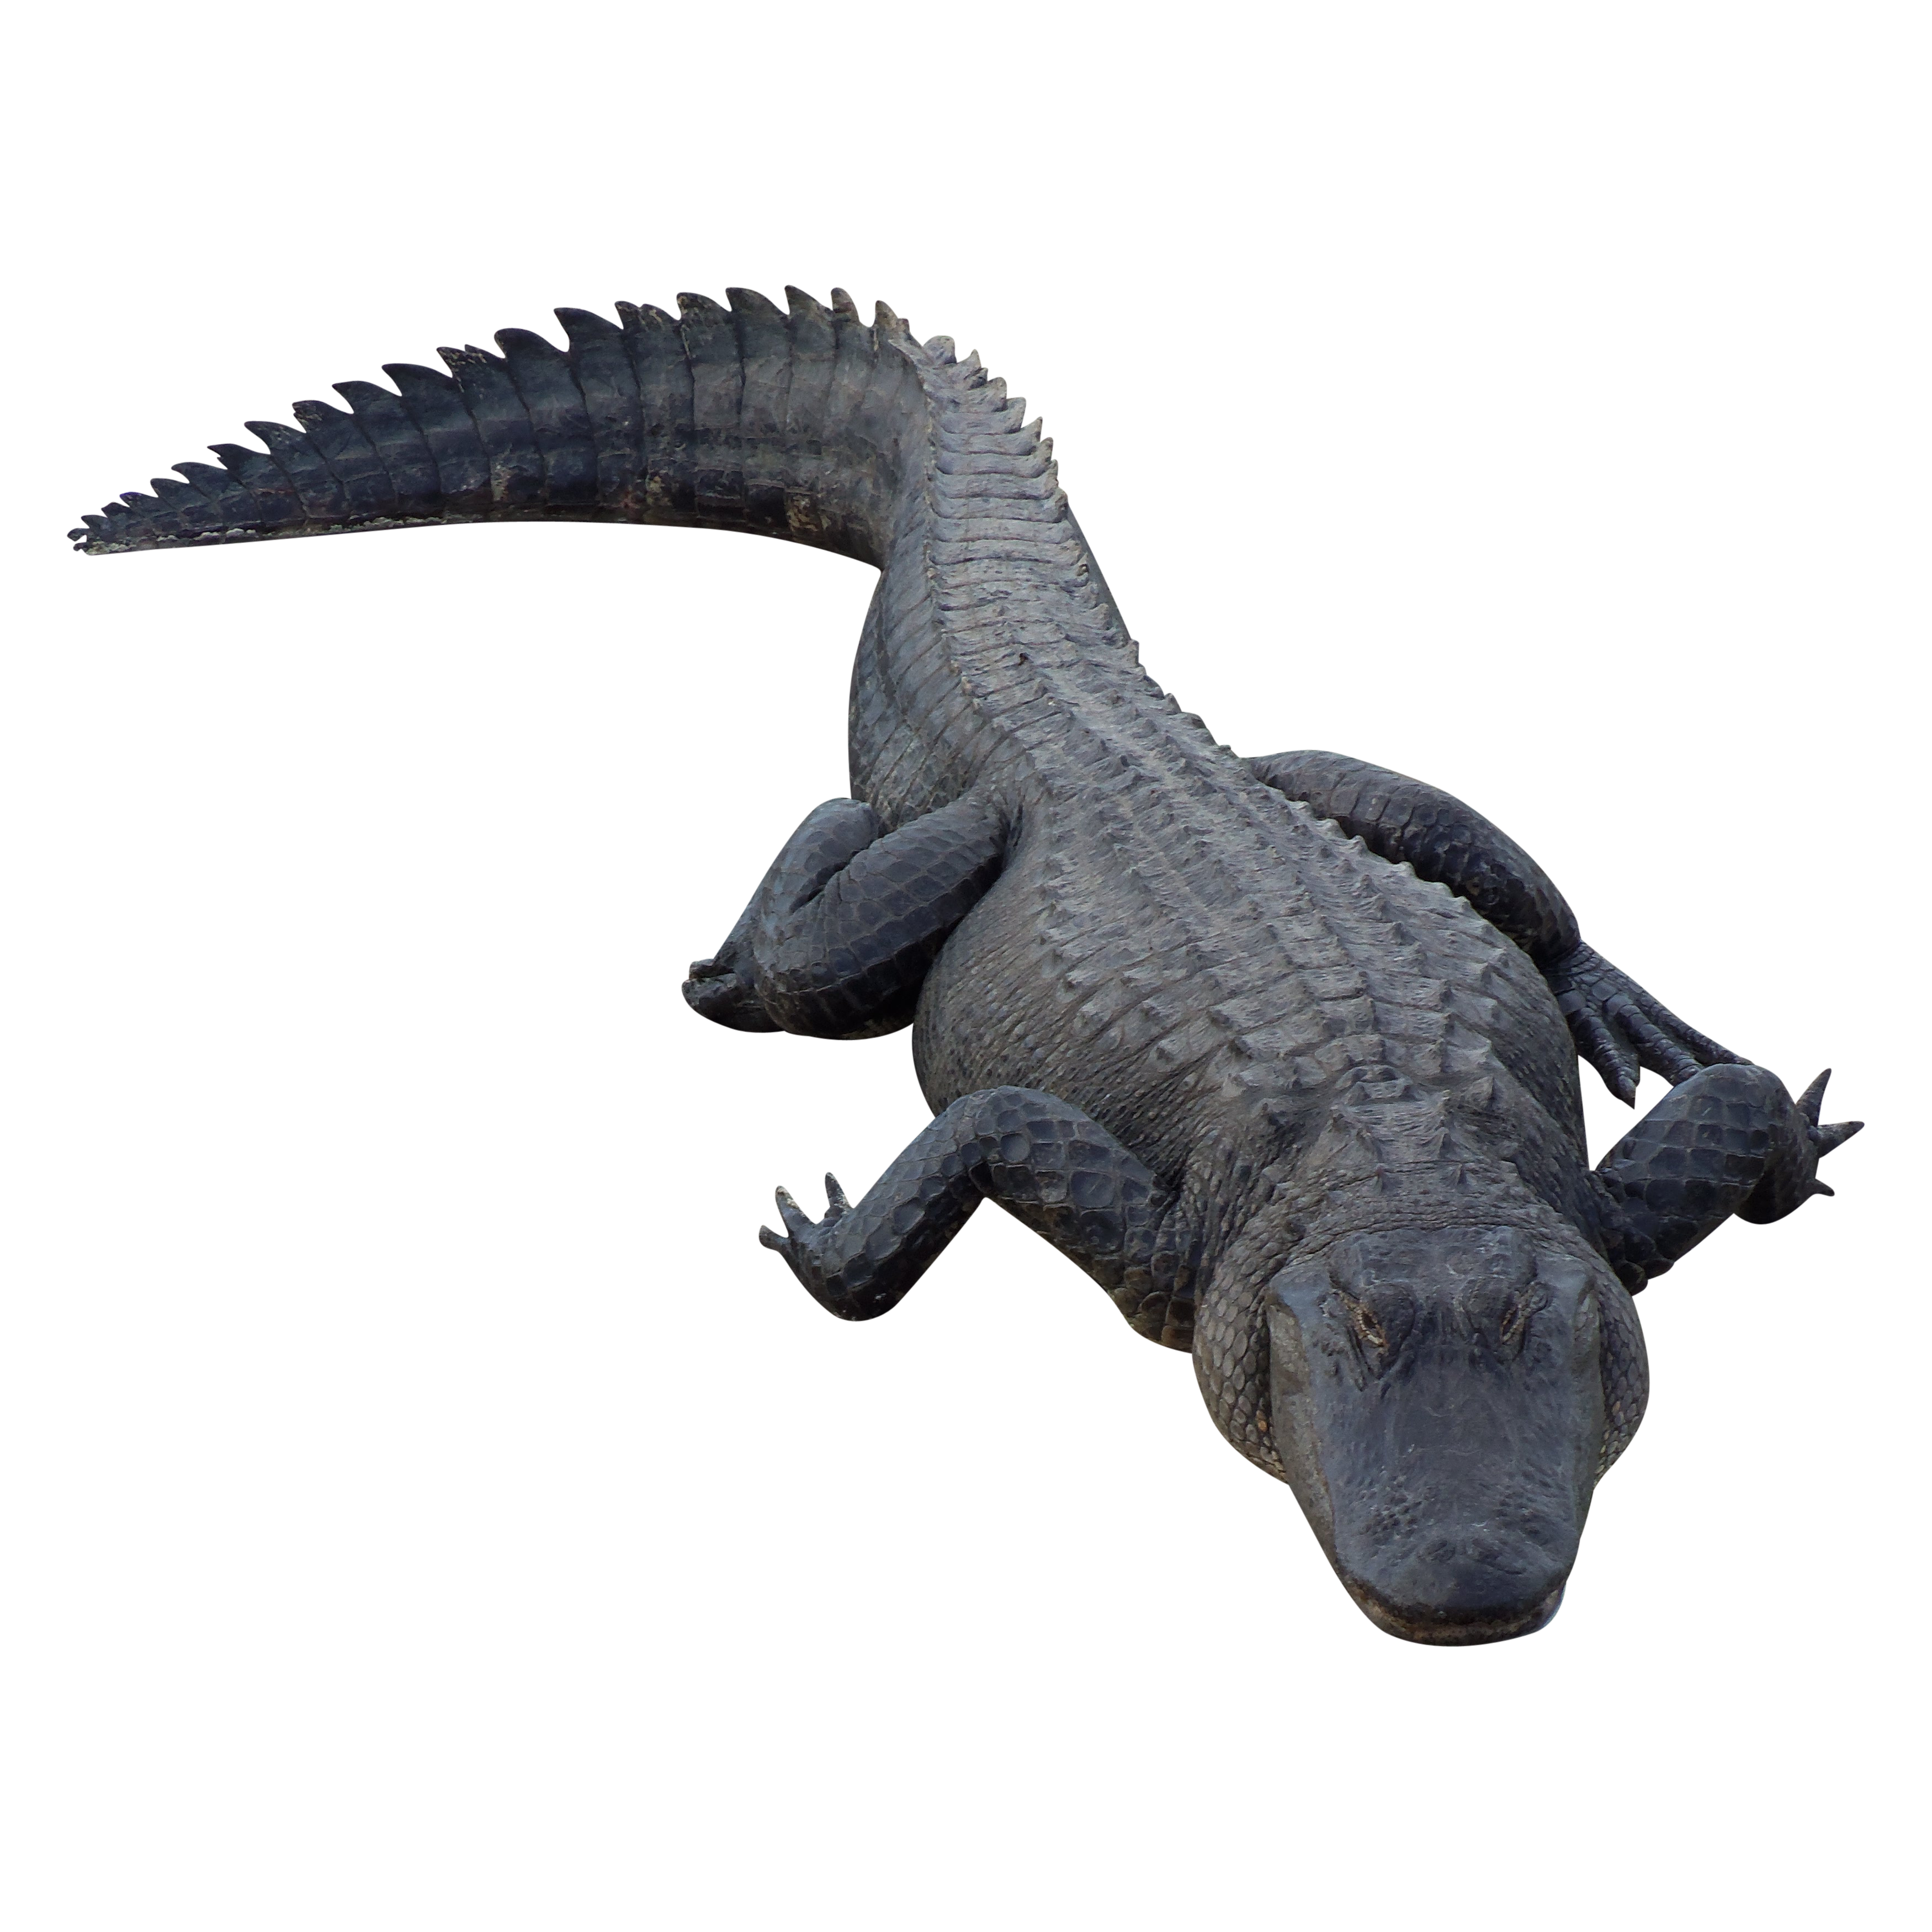 Gator clipart crocodile australian. Png images free download